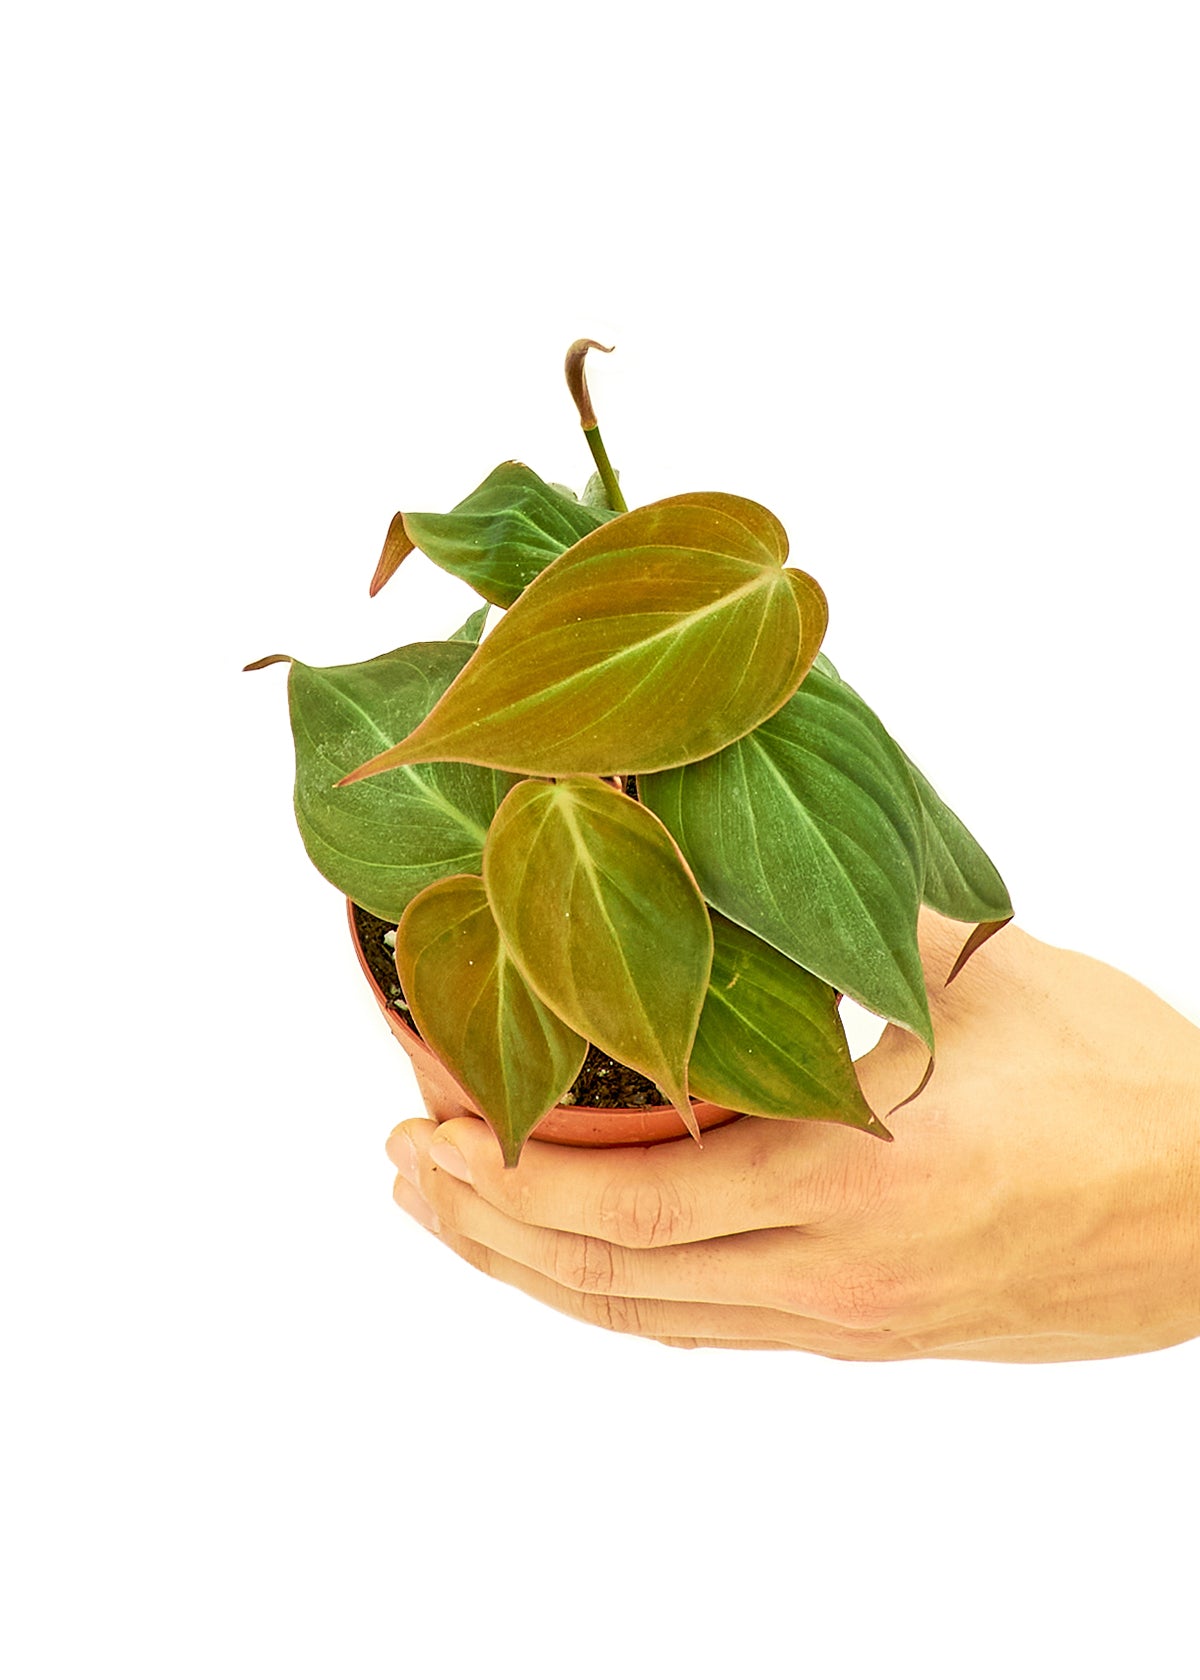 Small size Velvet Leaf Philodendron Plant in a growers pot with a white background with a hand holding the pot to show the top view